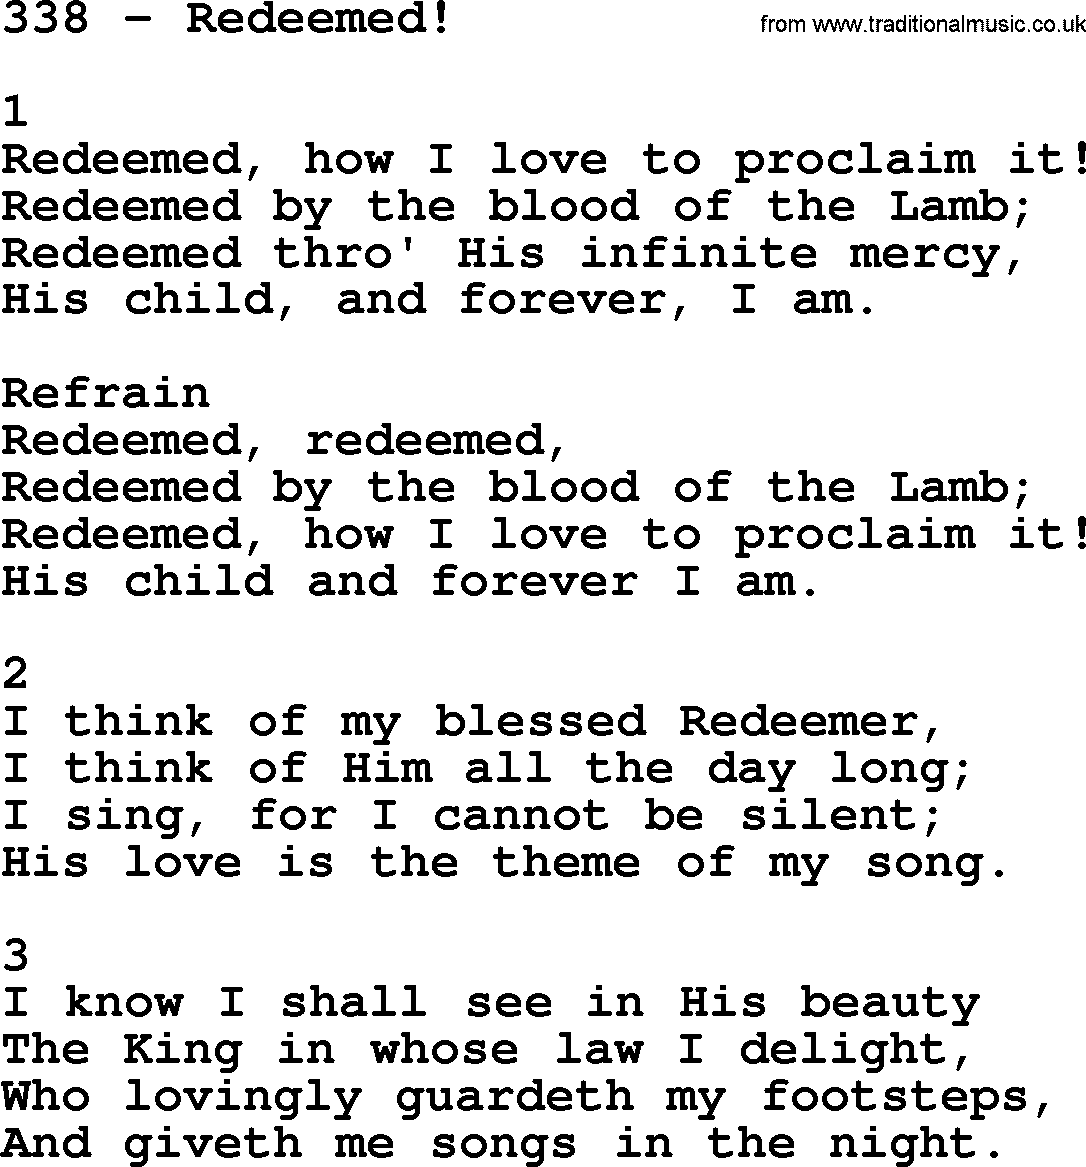 Complete Adventis Hymnal, title: 338-Redeemed!, with lyrics, midi, mp3, powerpoints(PPT) and PDF,